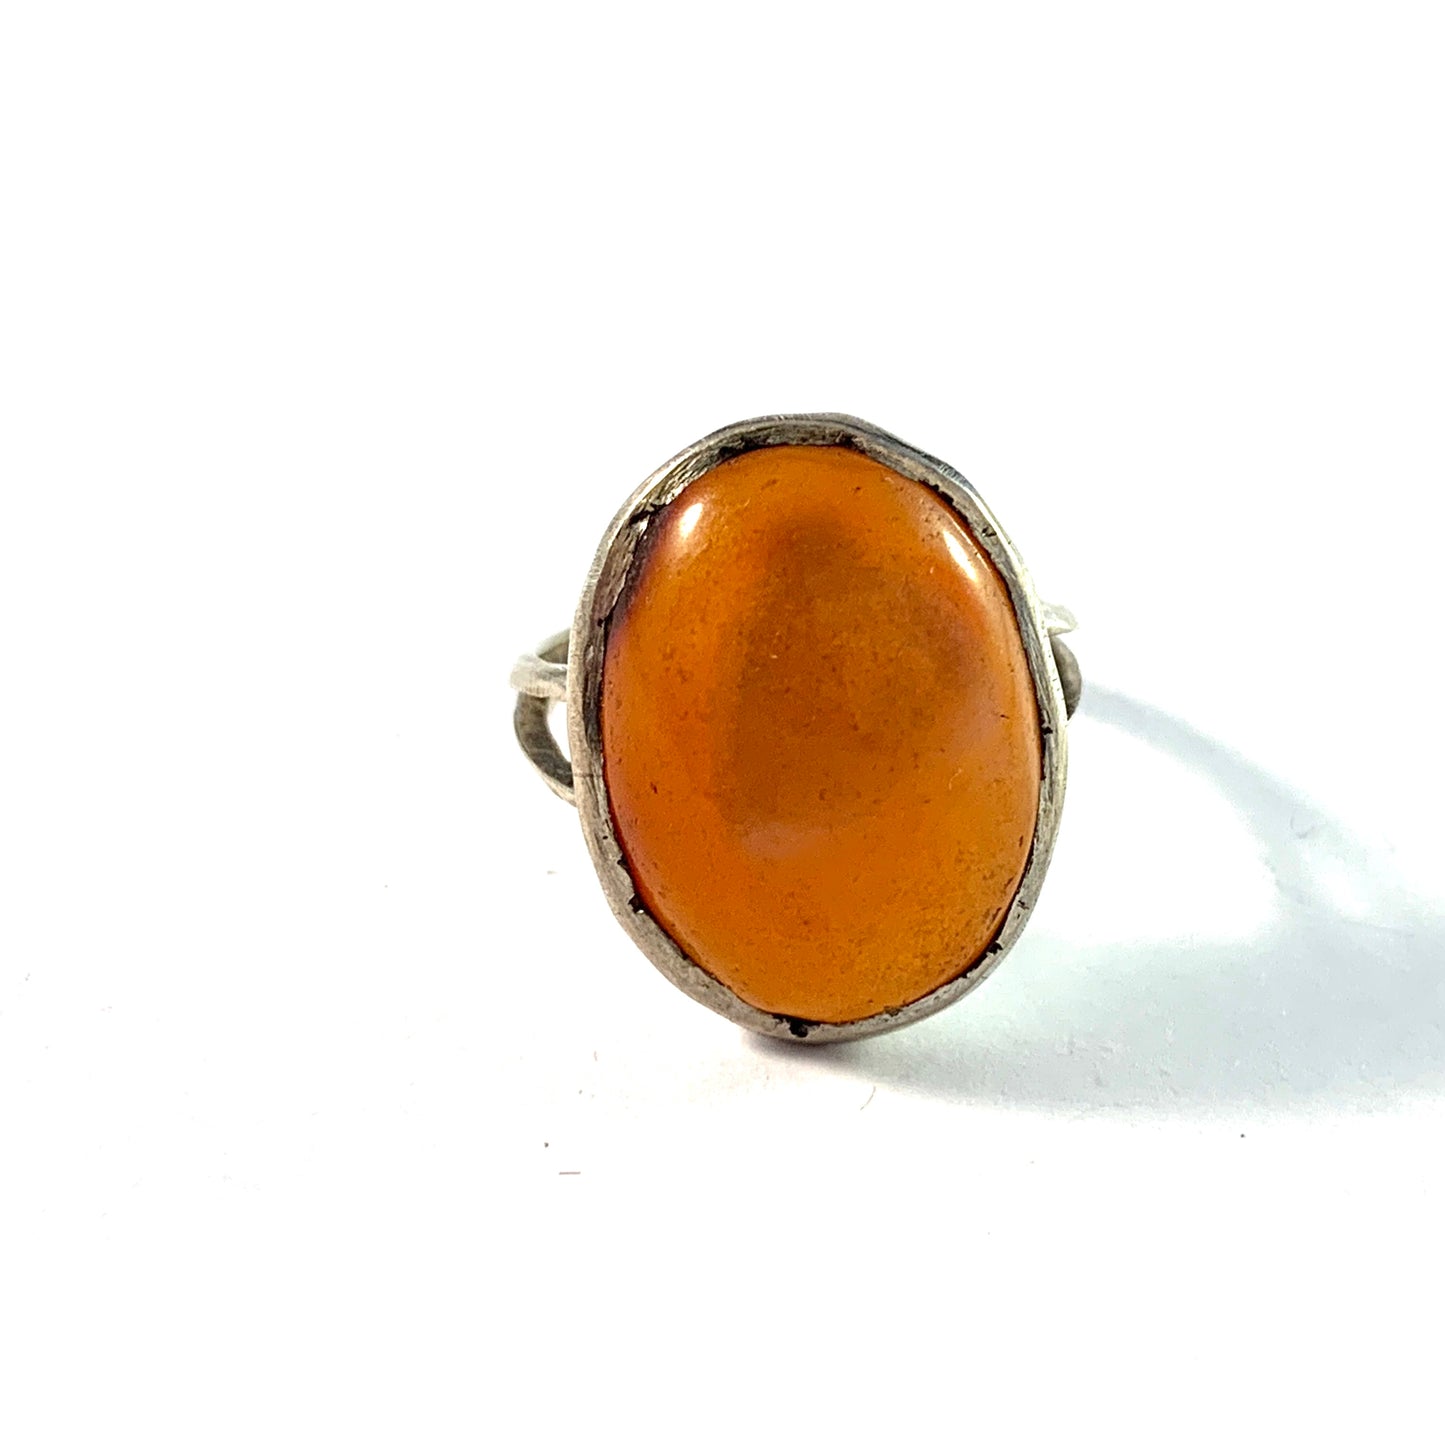 Scandinavia Early to Mid 1800s Antique Solid Silver Carnelian Ring.